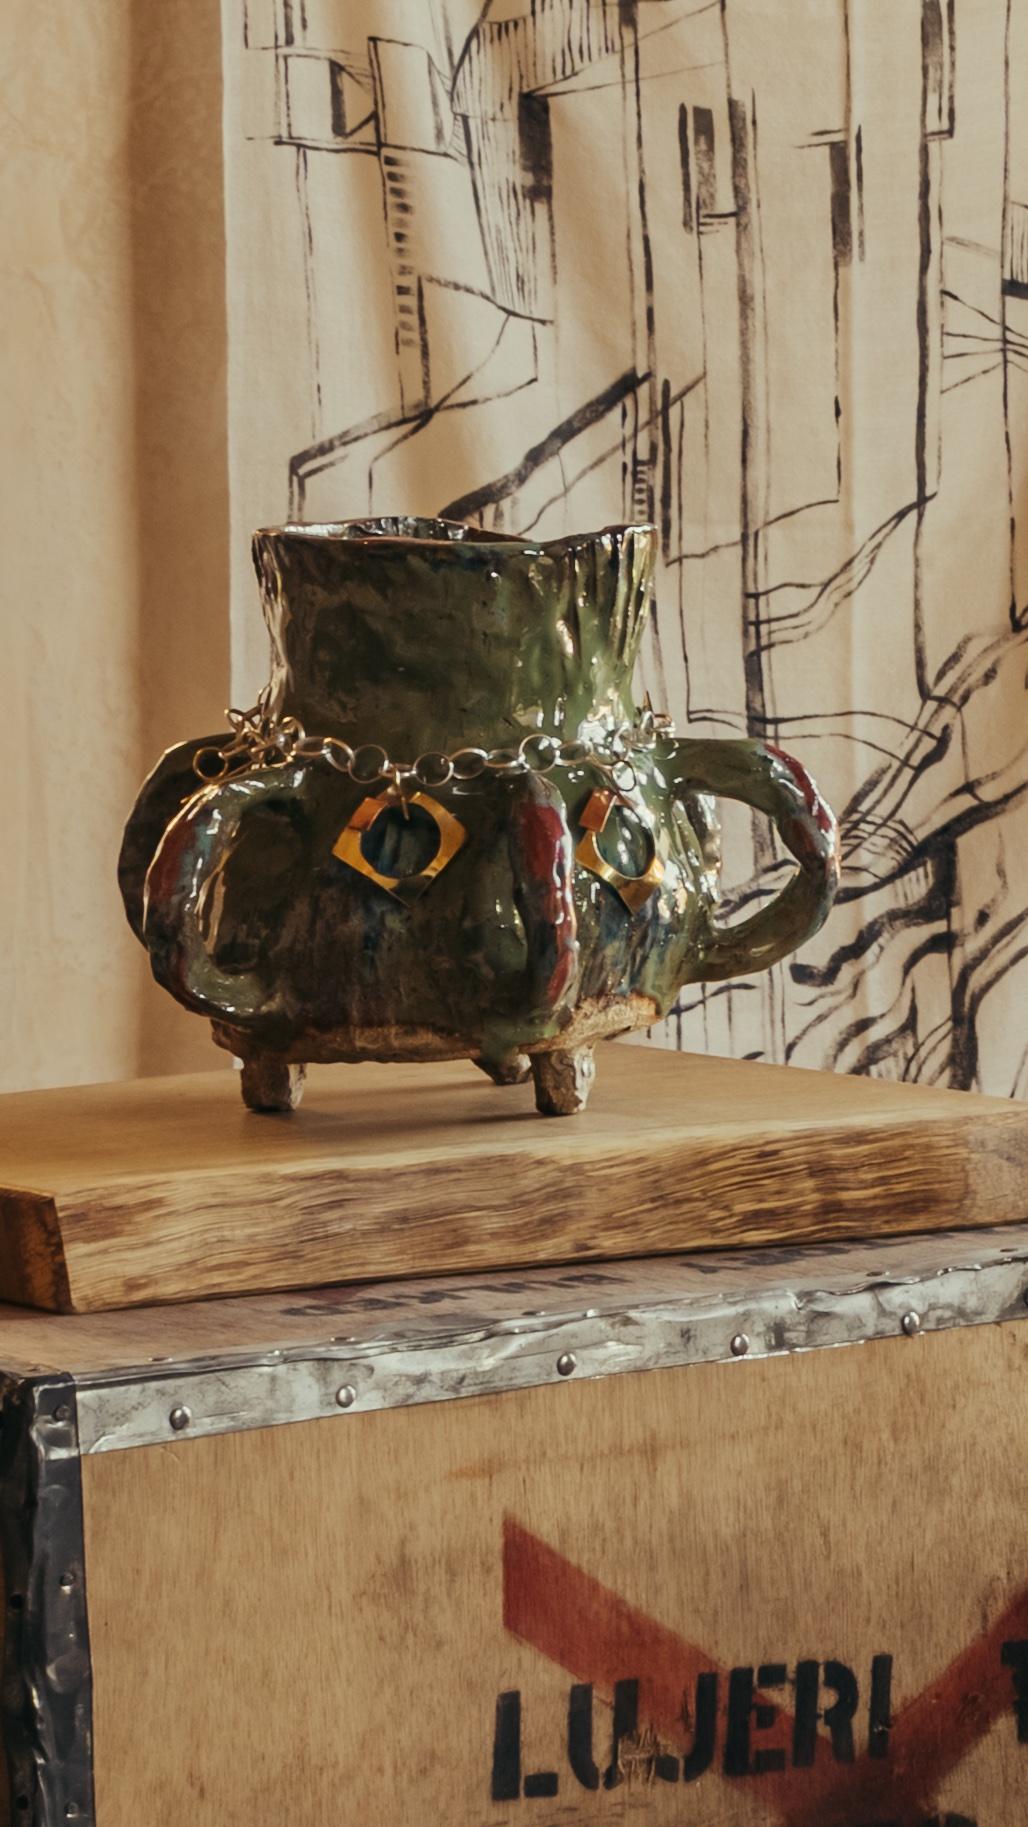 ALT= Ceramic vase with handles and feet by Glasgow based ceramicist and artist Morven Mulgrew. The vase sits on top of a wooden plank, and vintage tea box, as part of The Grit and The Glamour exhibition at Bard Scotland.